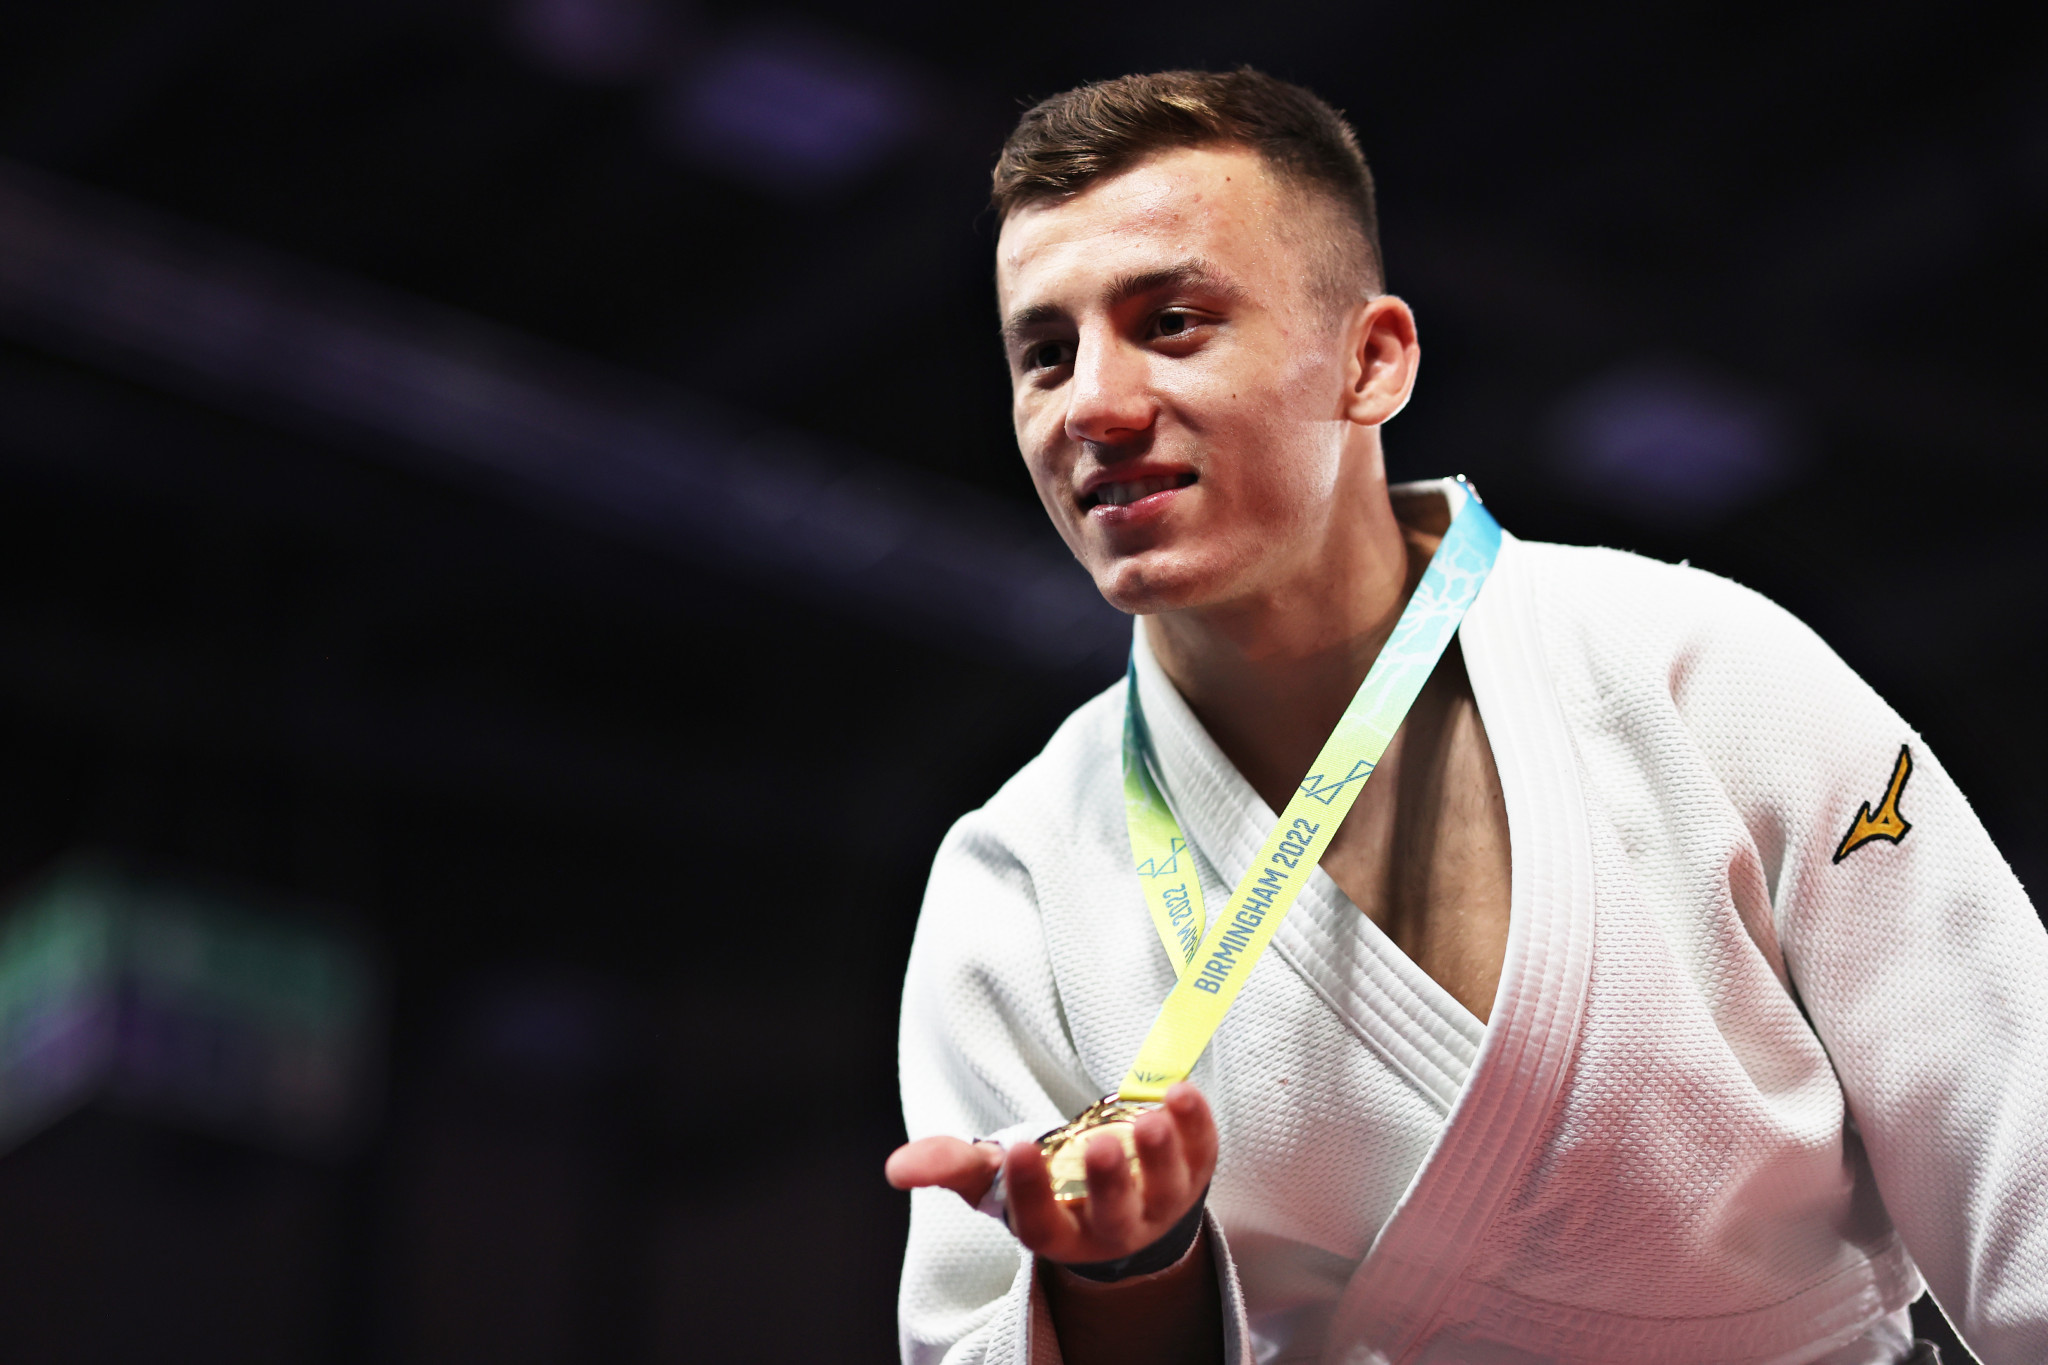 A gold medal at the Birmingham 2022 Commonwealth Games had been preceded by victory at the GSSE in 2019 for Cypriot judoka Georgios Balarjishvili ©Getty Images